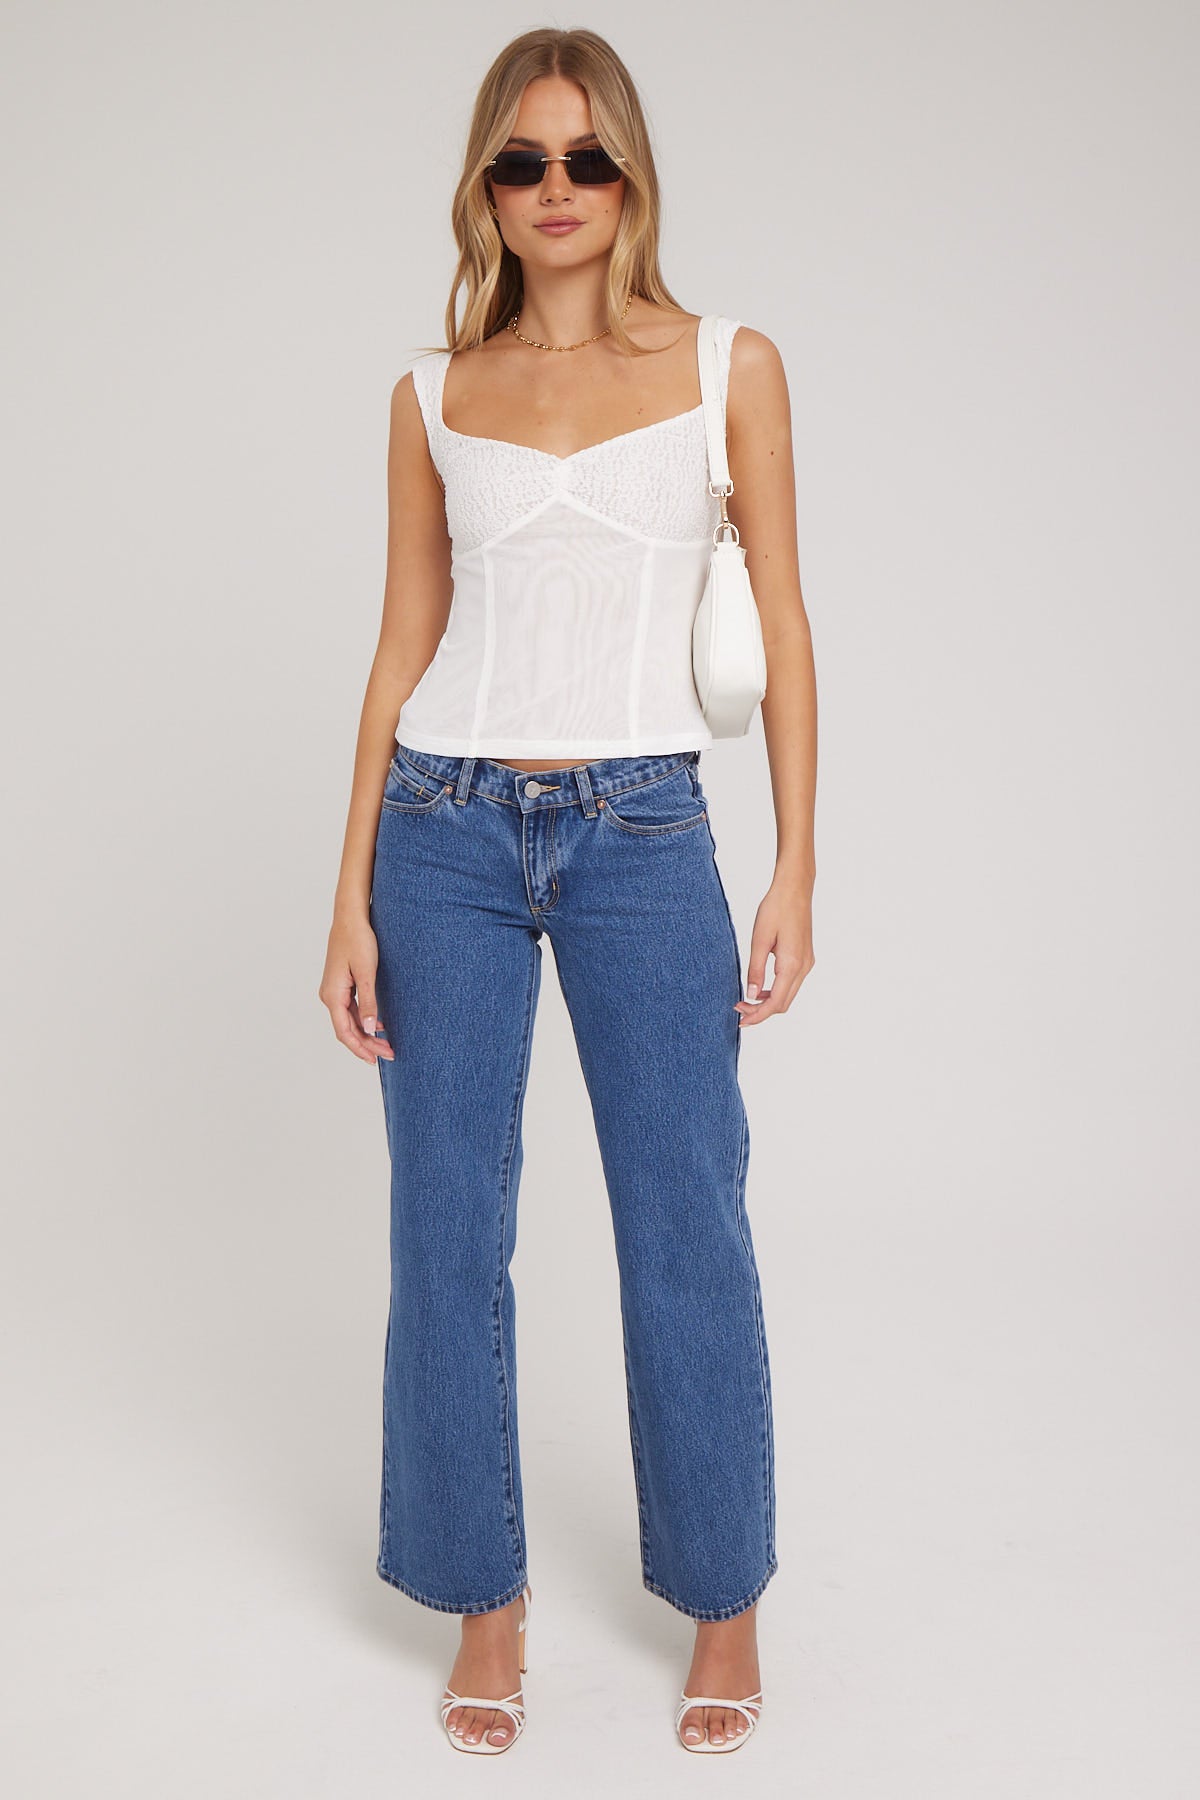 Luck & Trouble Odette Lace Mesh Top White